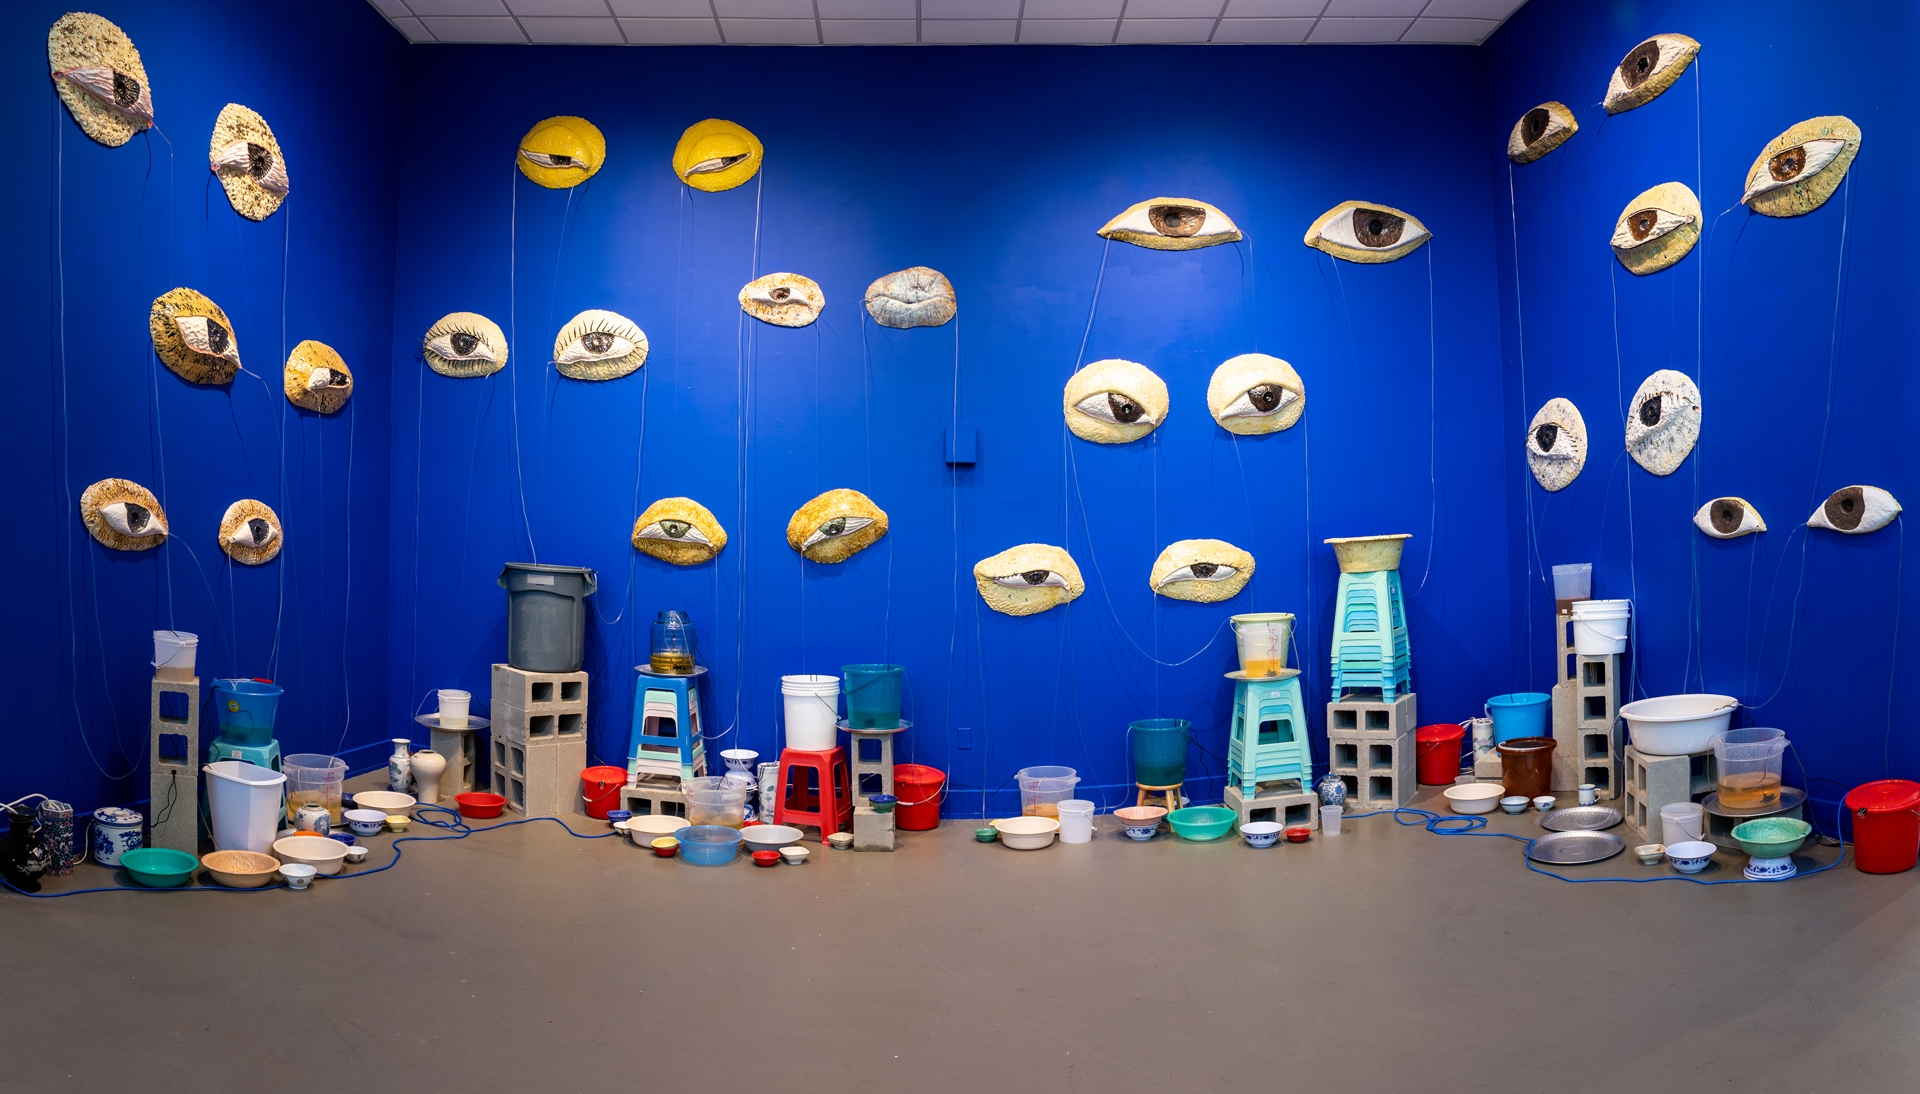 Blue gallery walls with large ceramic eyes mounted and multicolored buckets and stools below